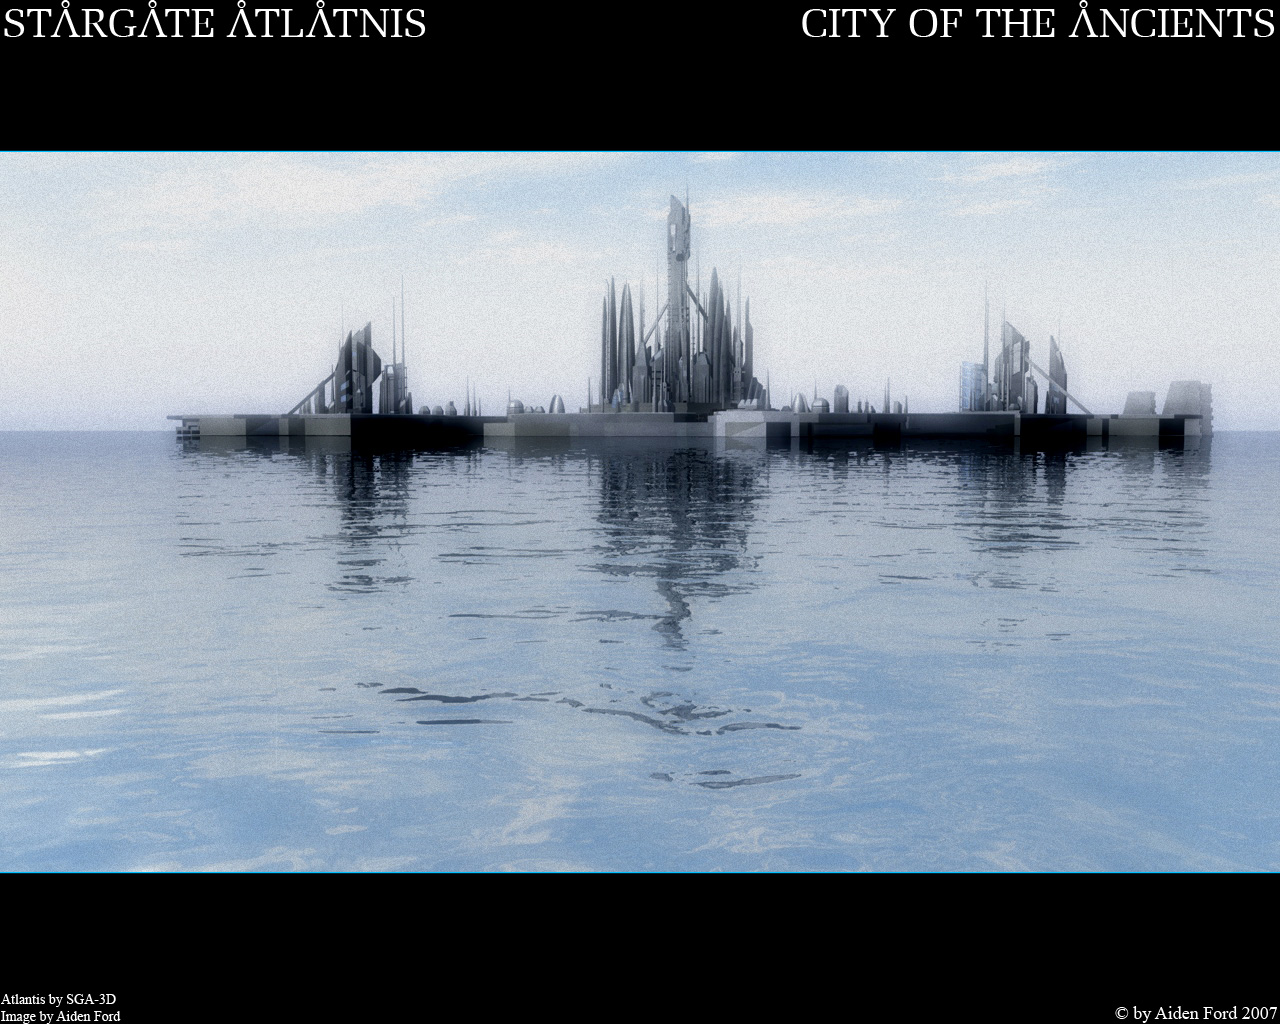 City_of_the_Ancients.jpg